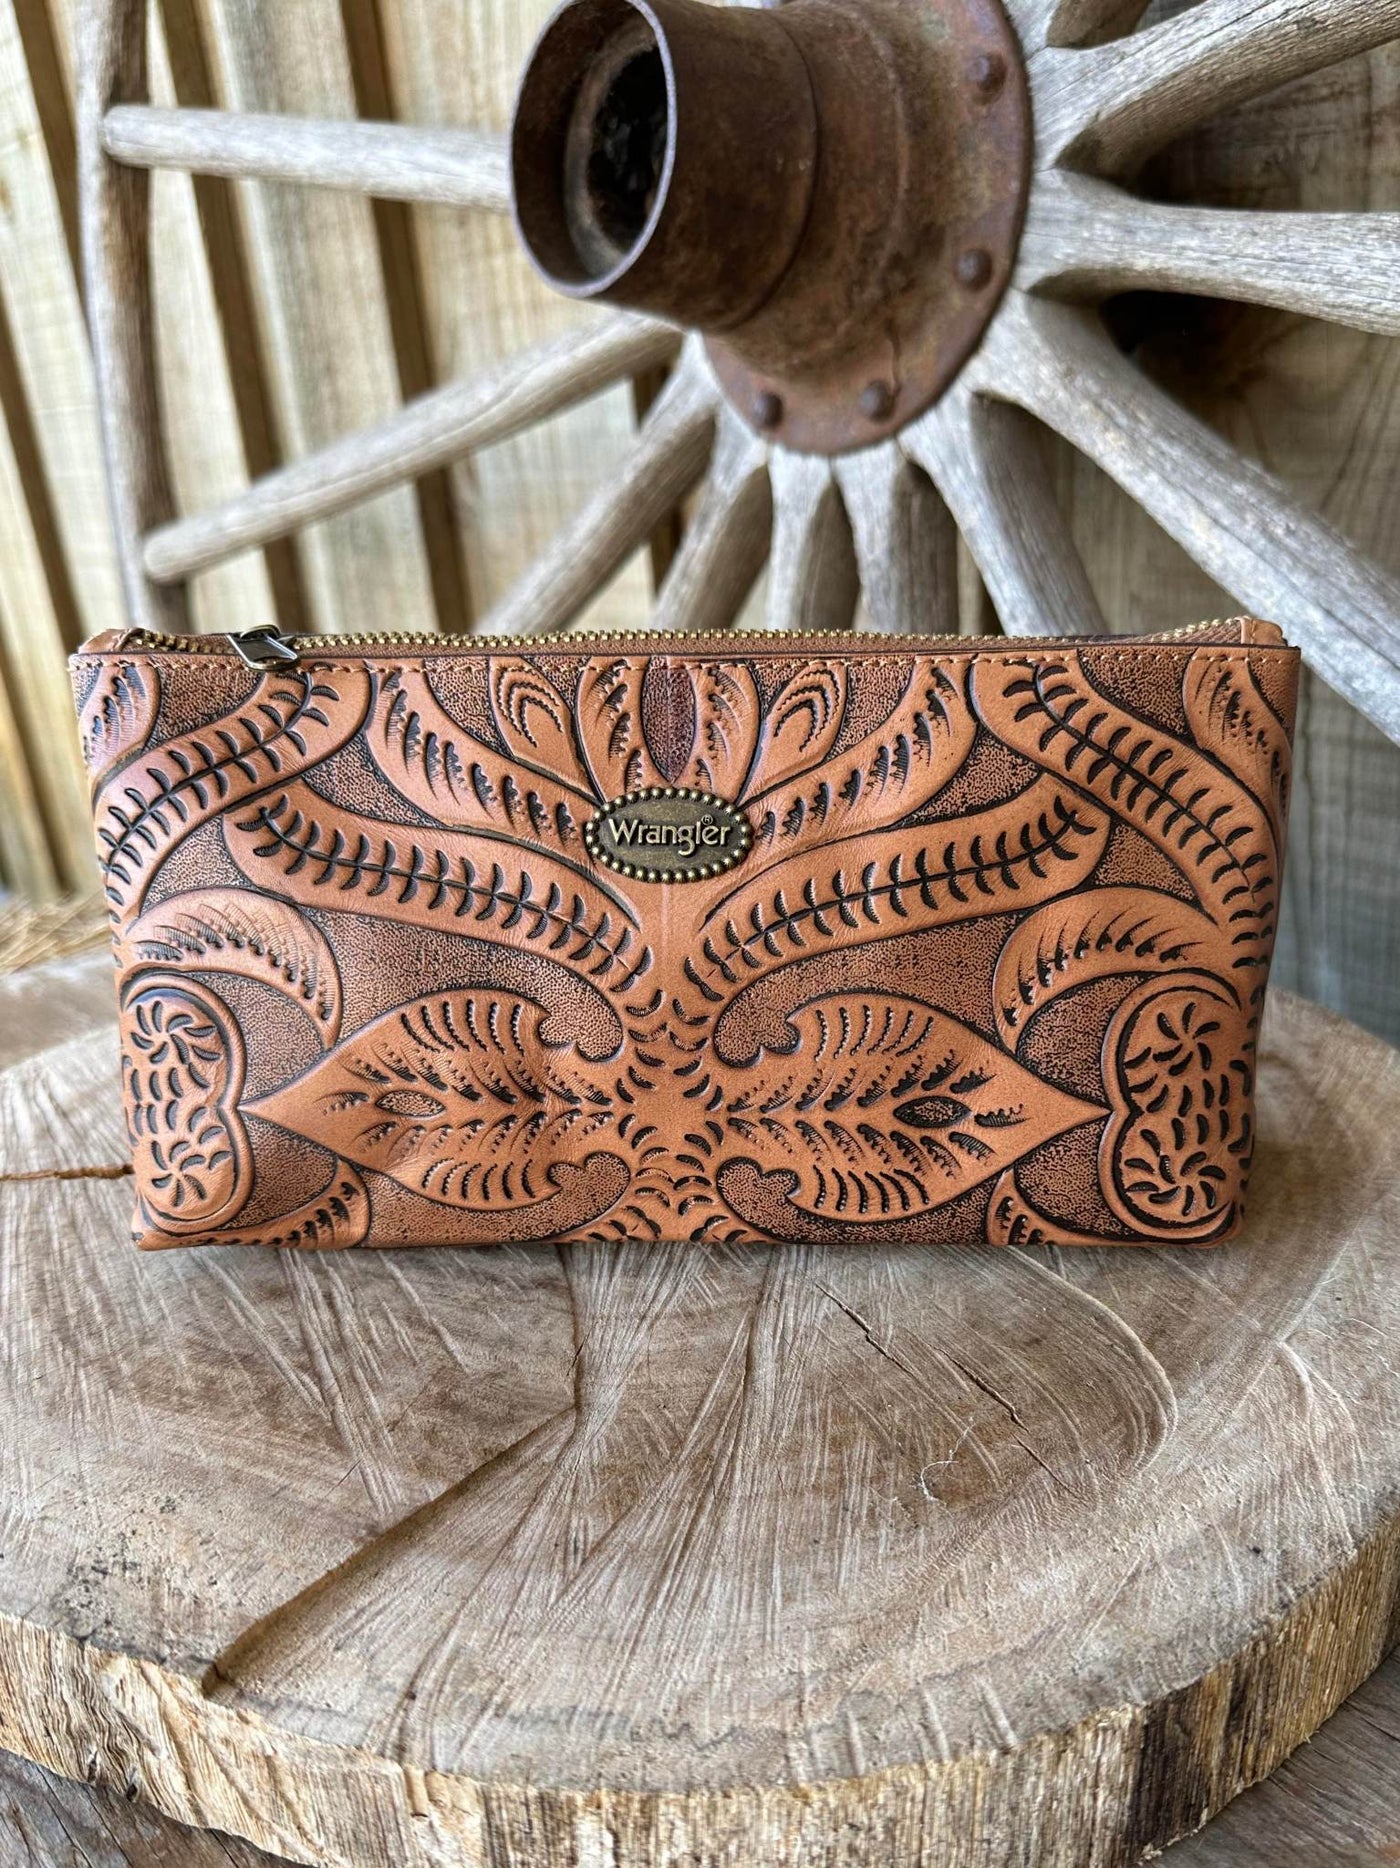 Gift - Wrangler Tooled Leather Costmetic Case